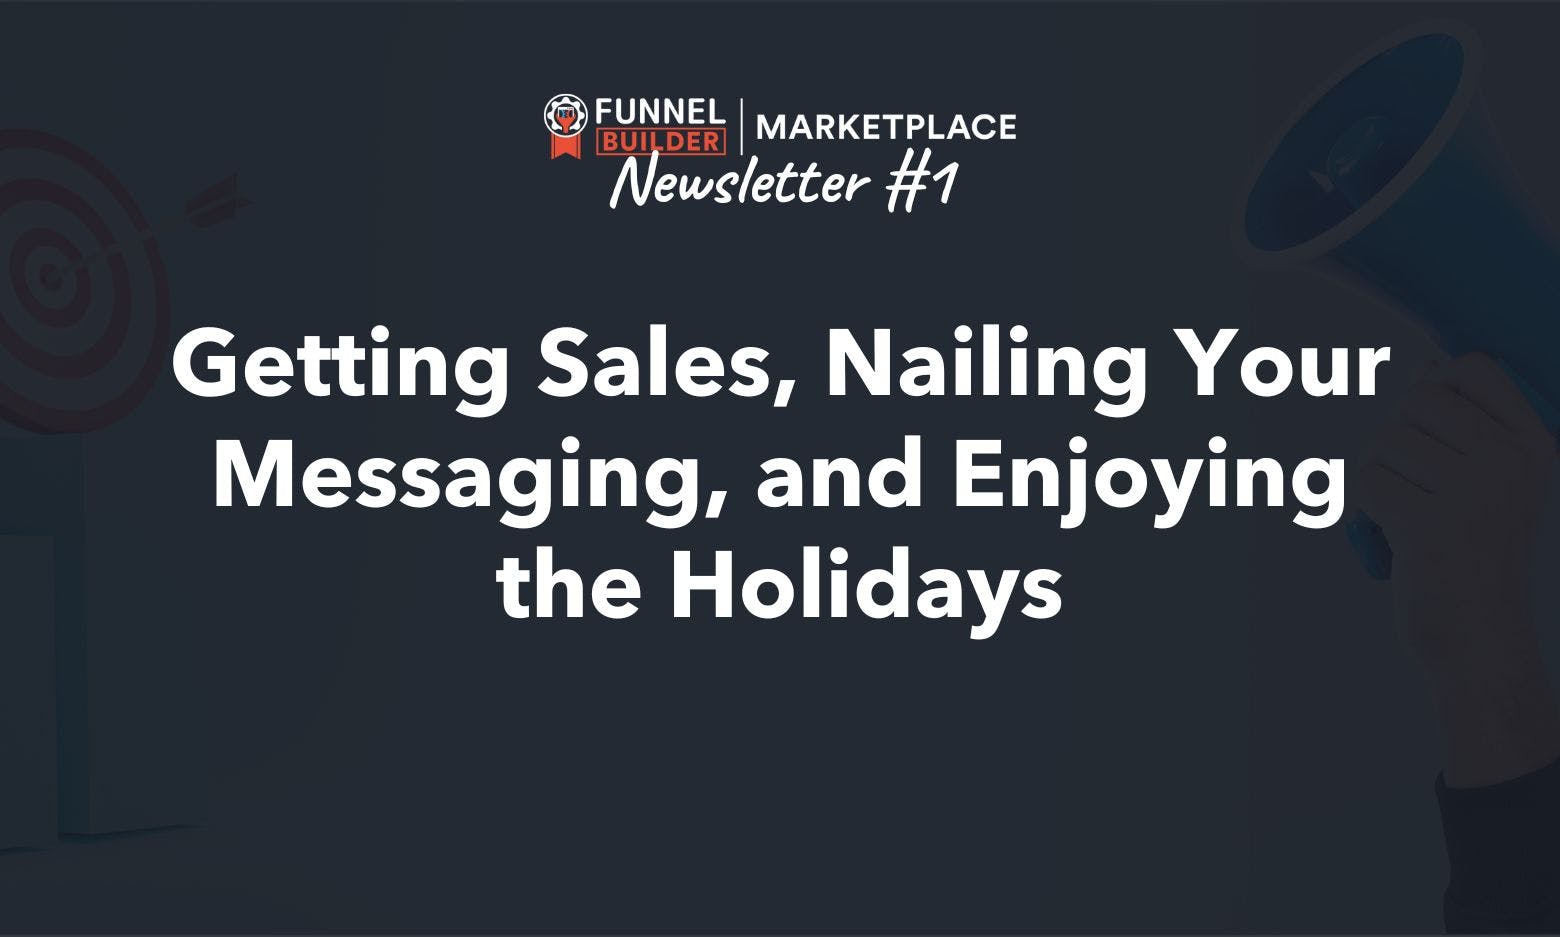 Newsletter #1: Getting Sales, Nailing Your Messaging, and Enjoying the Holidays